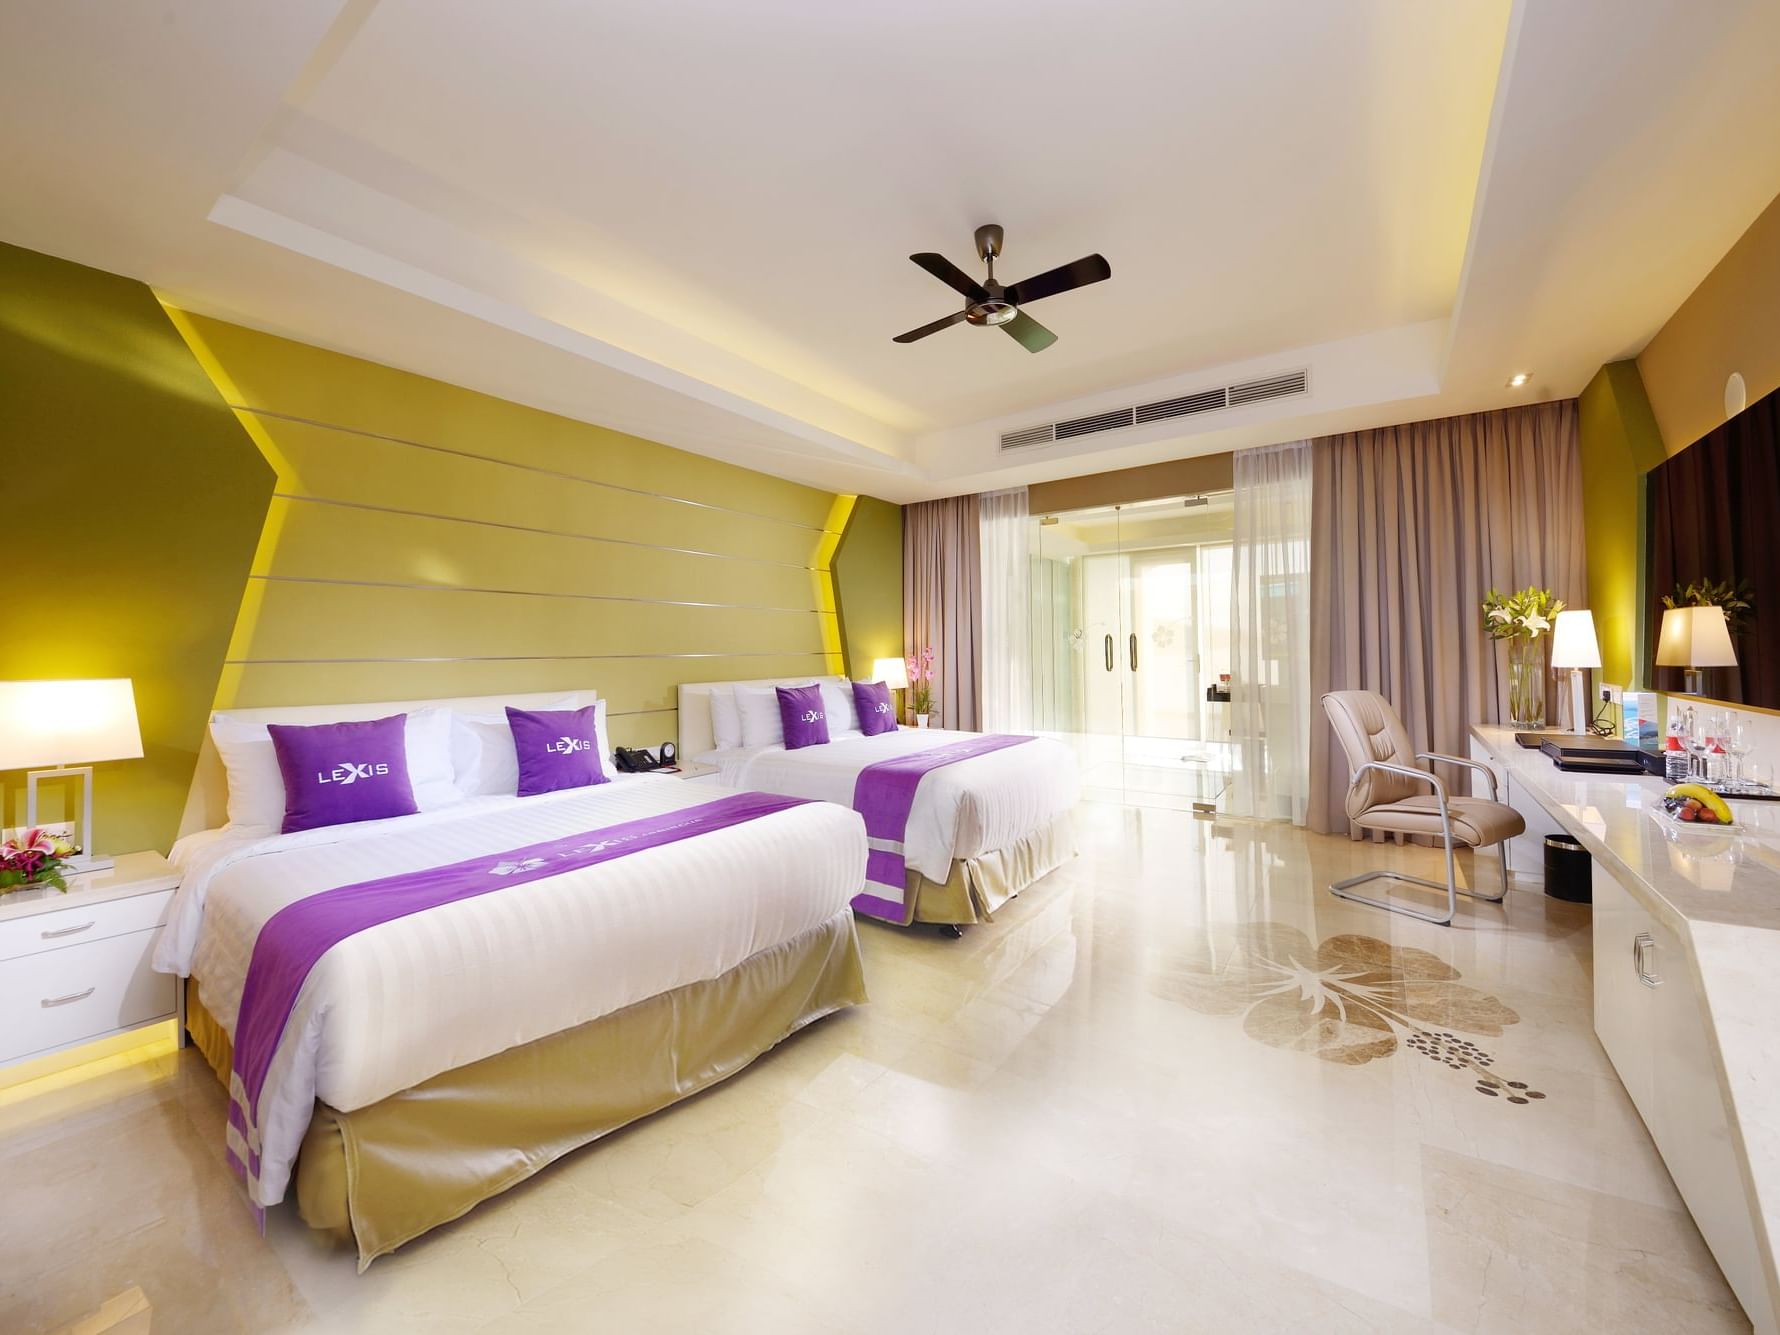 Sea view Premium Pool Villa Room with 2 king size beds - Lexis Hibiscus® Port Dickson